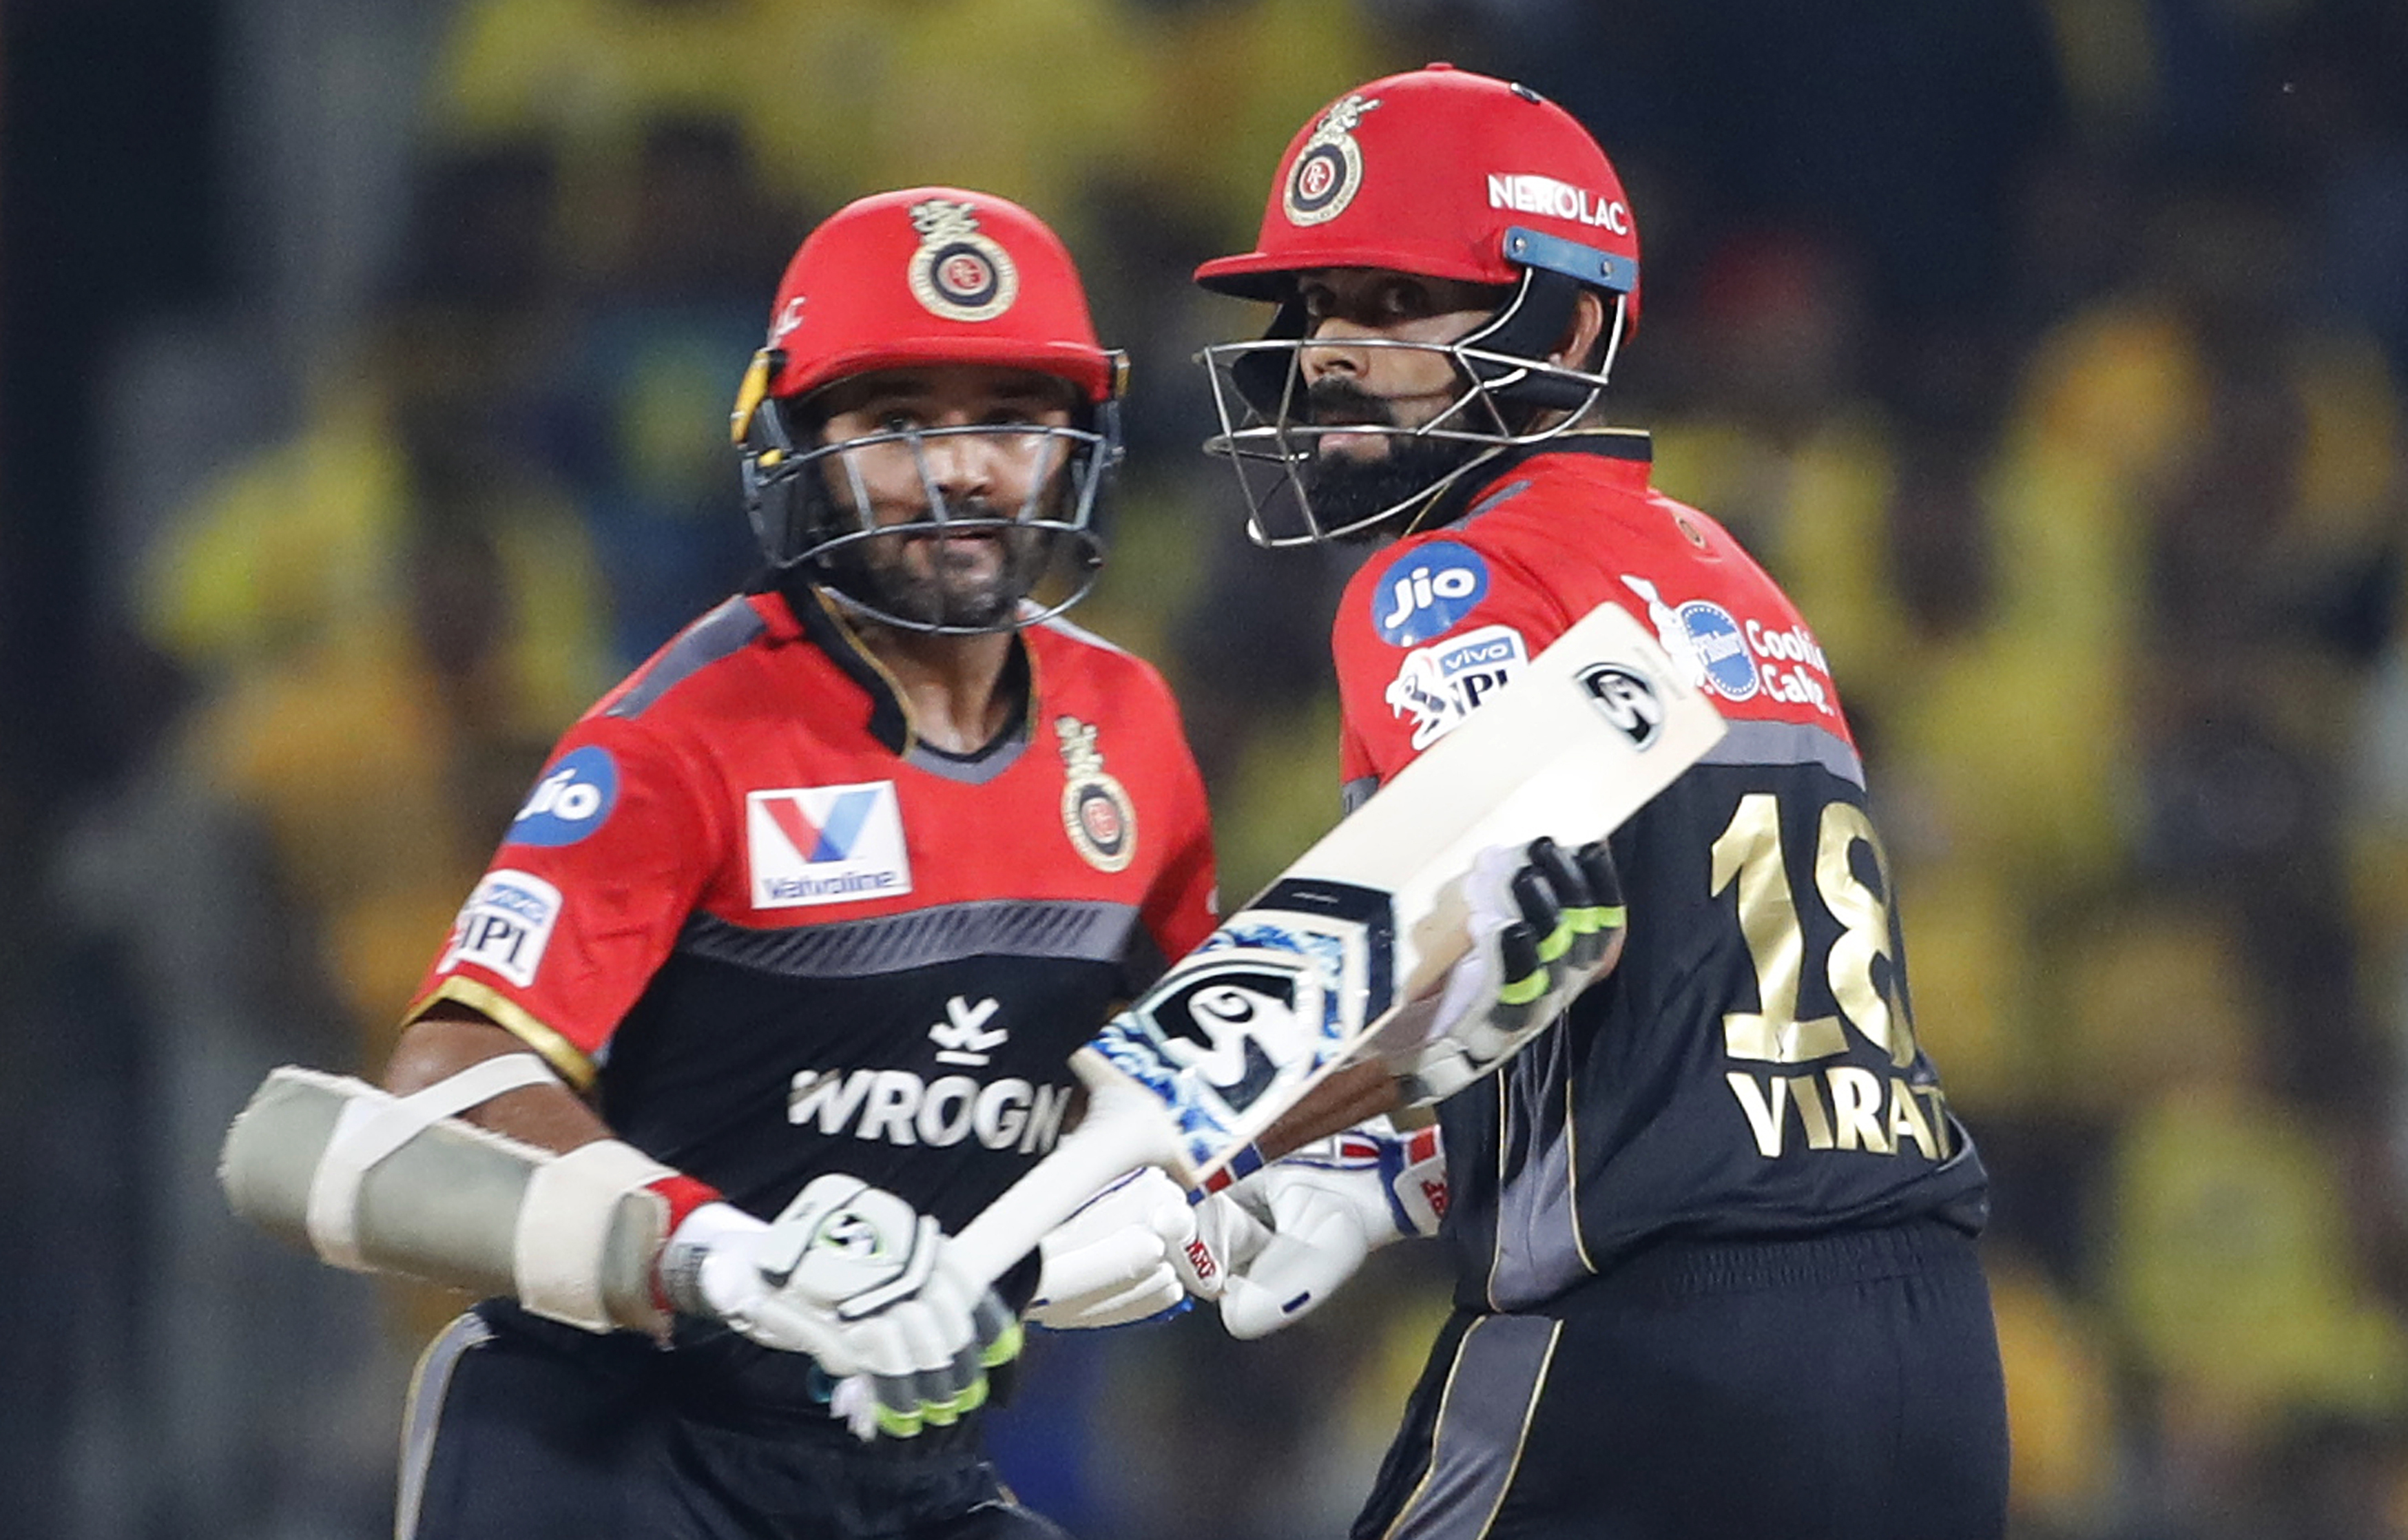 Royal Challengers Bangalore captain Virat Kohli, right, and Parthiv Patel run between the wickets to score during the VIVO IPL T20 cricket match between Chennai Super Kings and Royal Challengers Bangalore in Chennai - AP